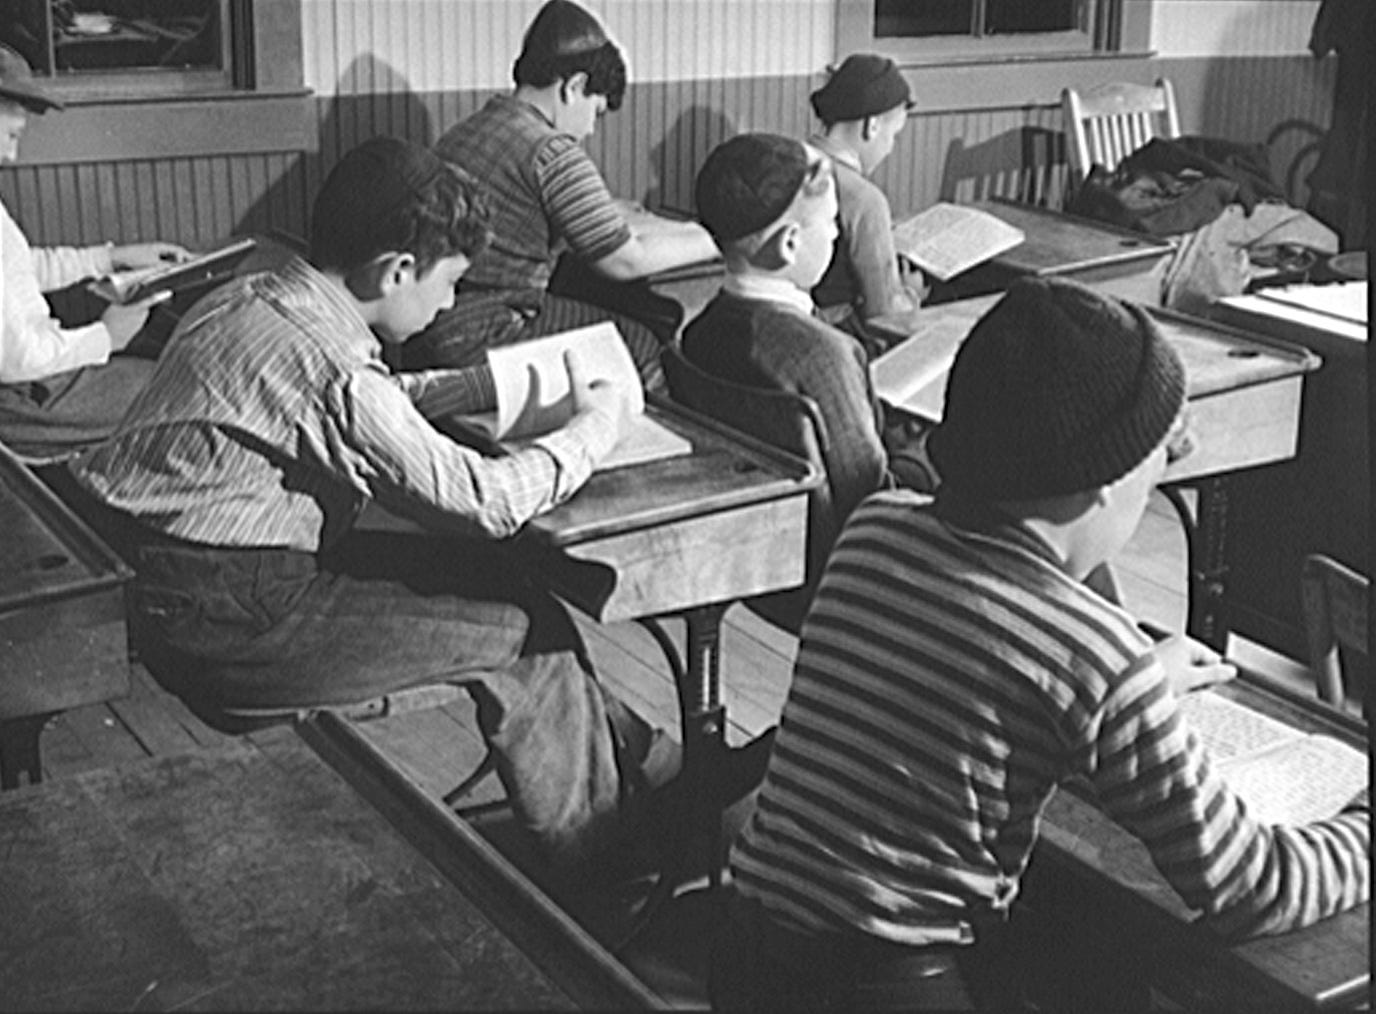 The Day School Tuition Crisis: A Short History - Jewish Review of Books